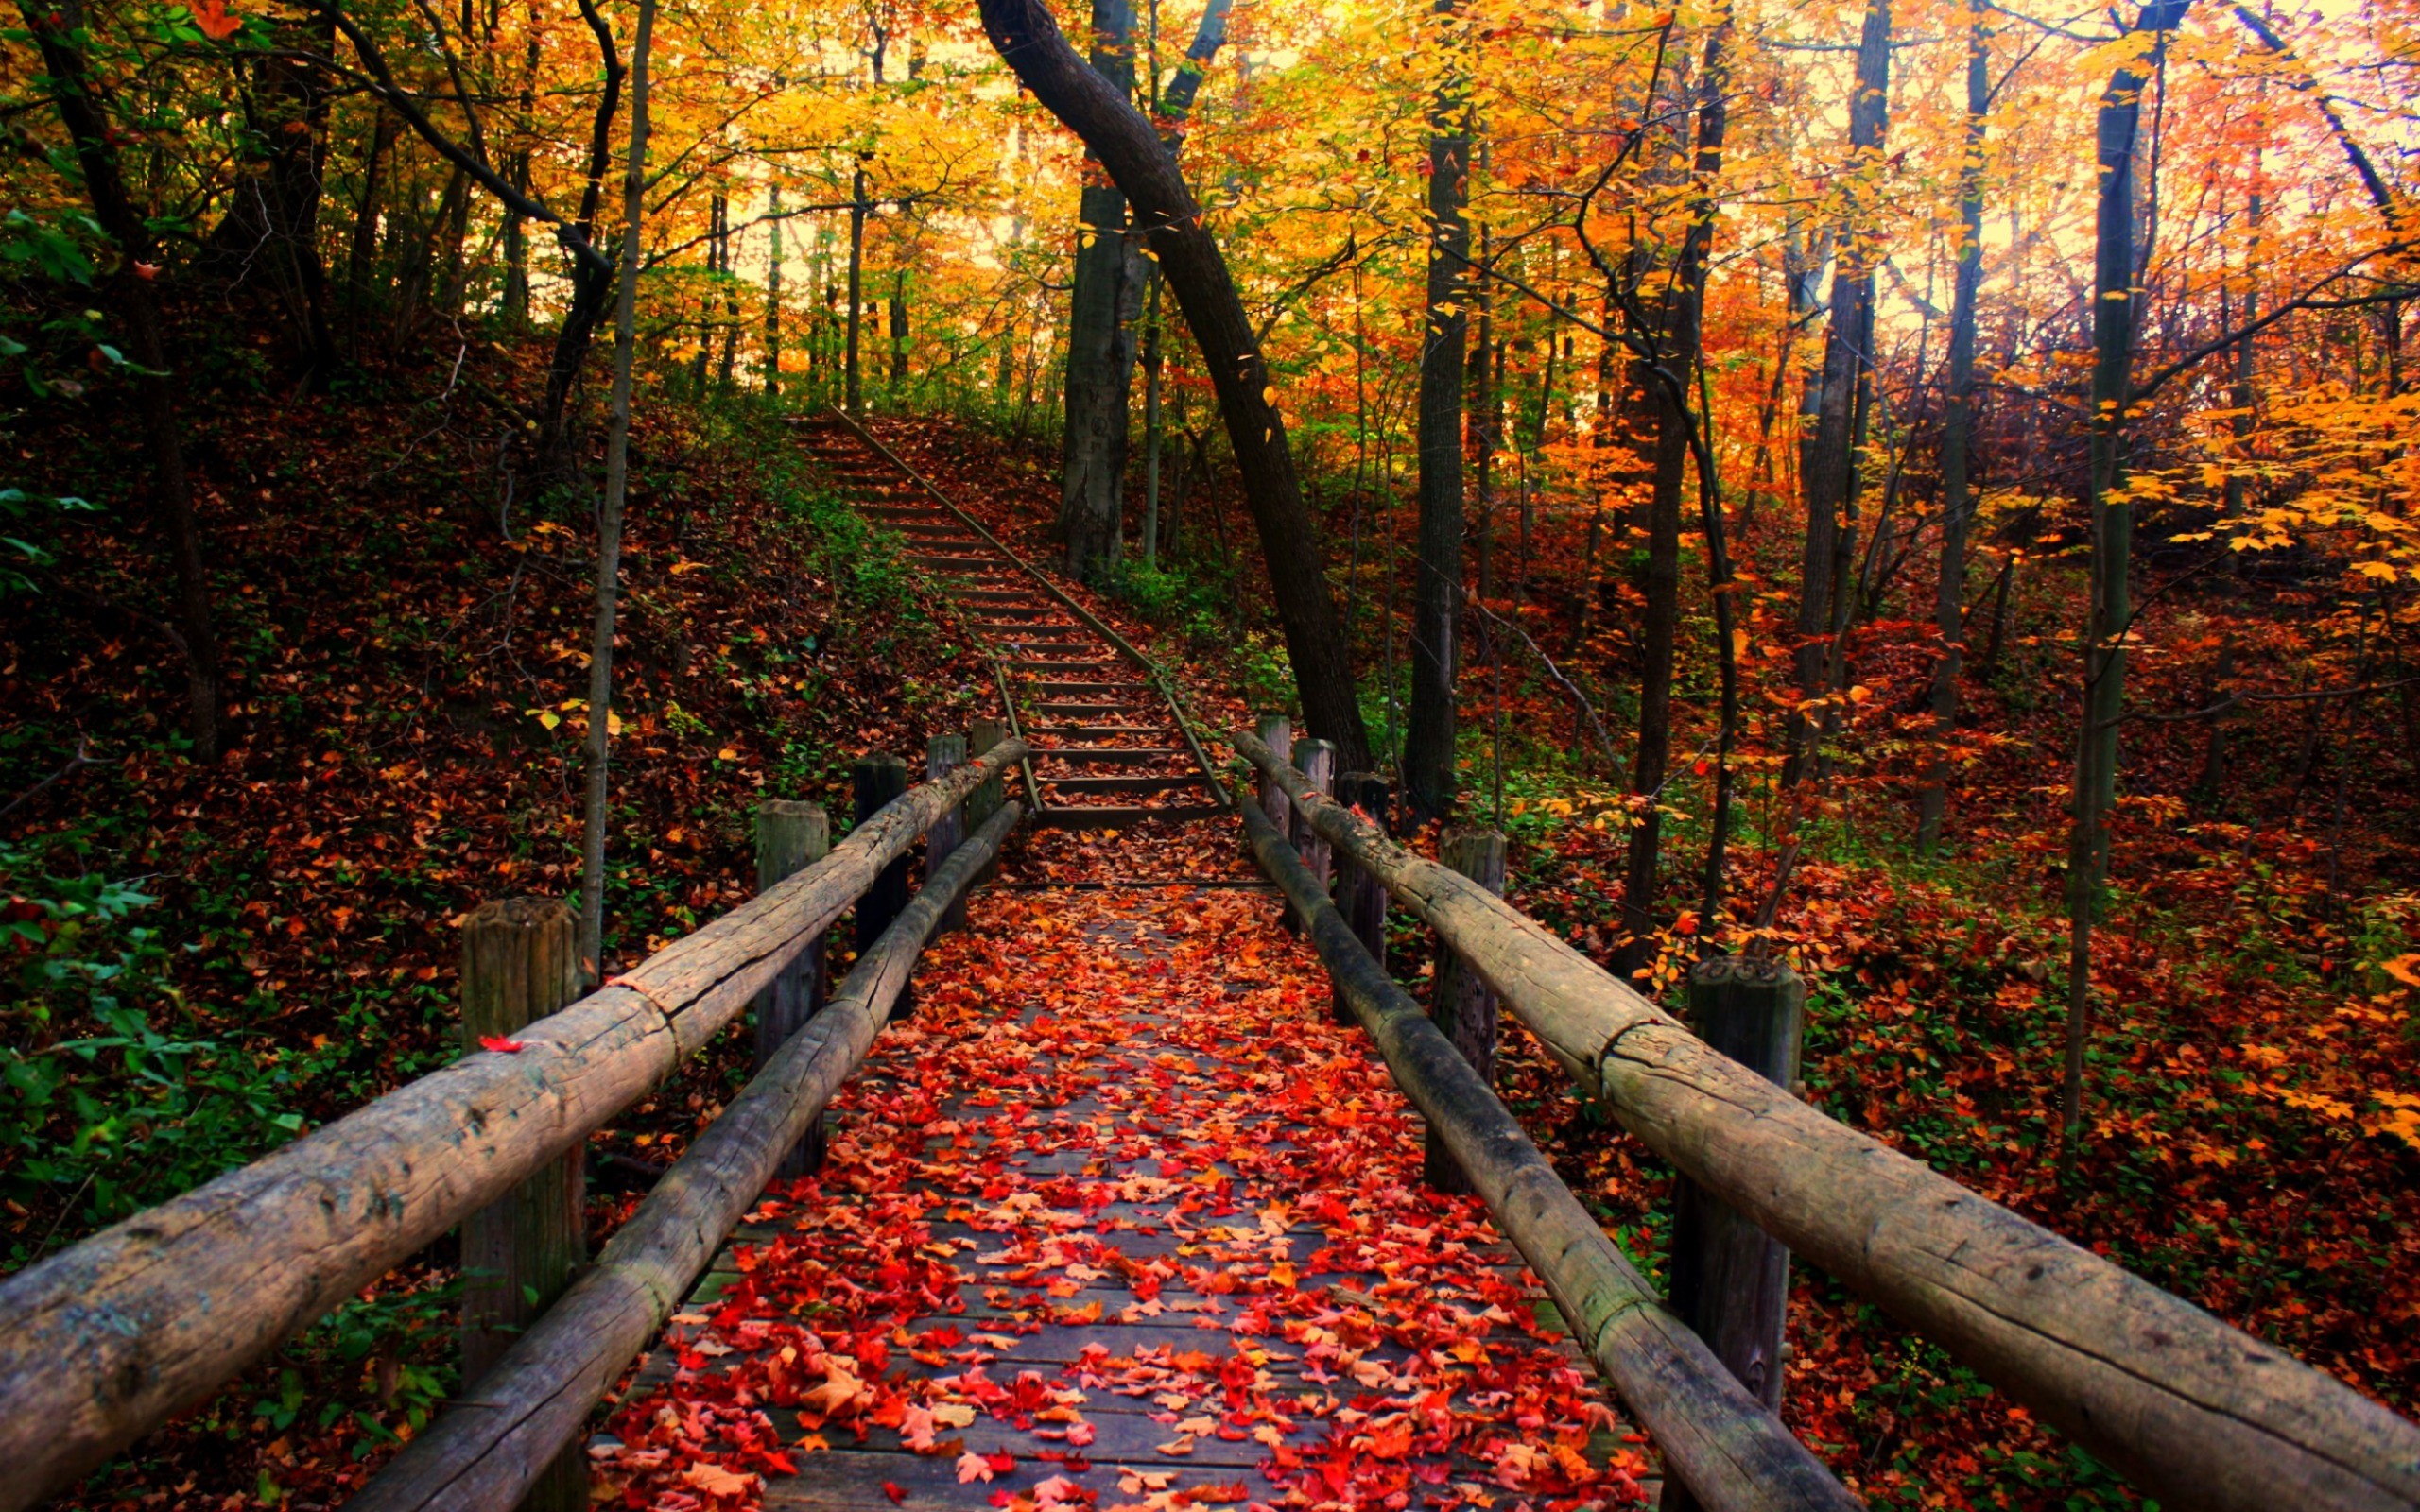 Autumn, Scenery, wooden, Bridge, And, Stairs, In, The, Forest